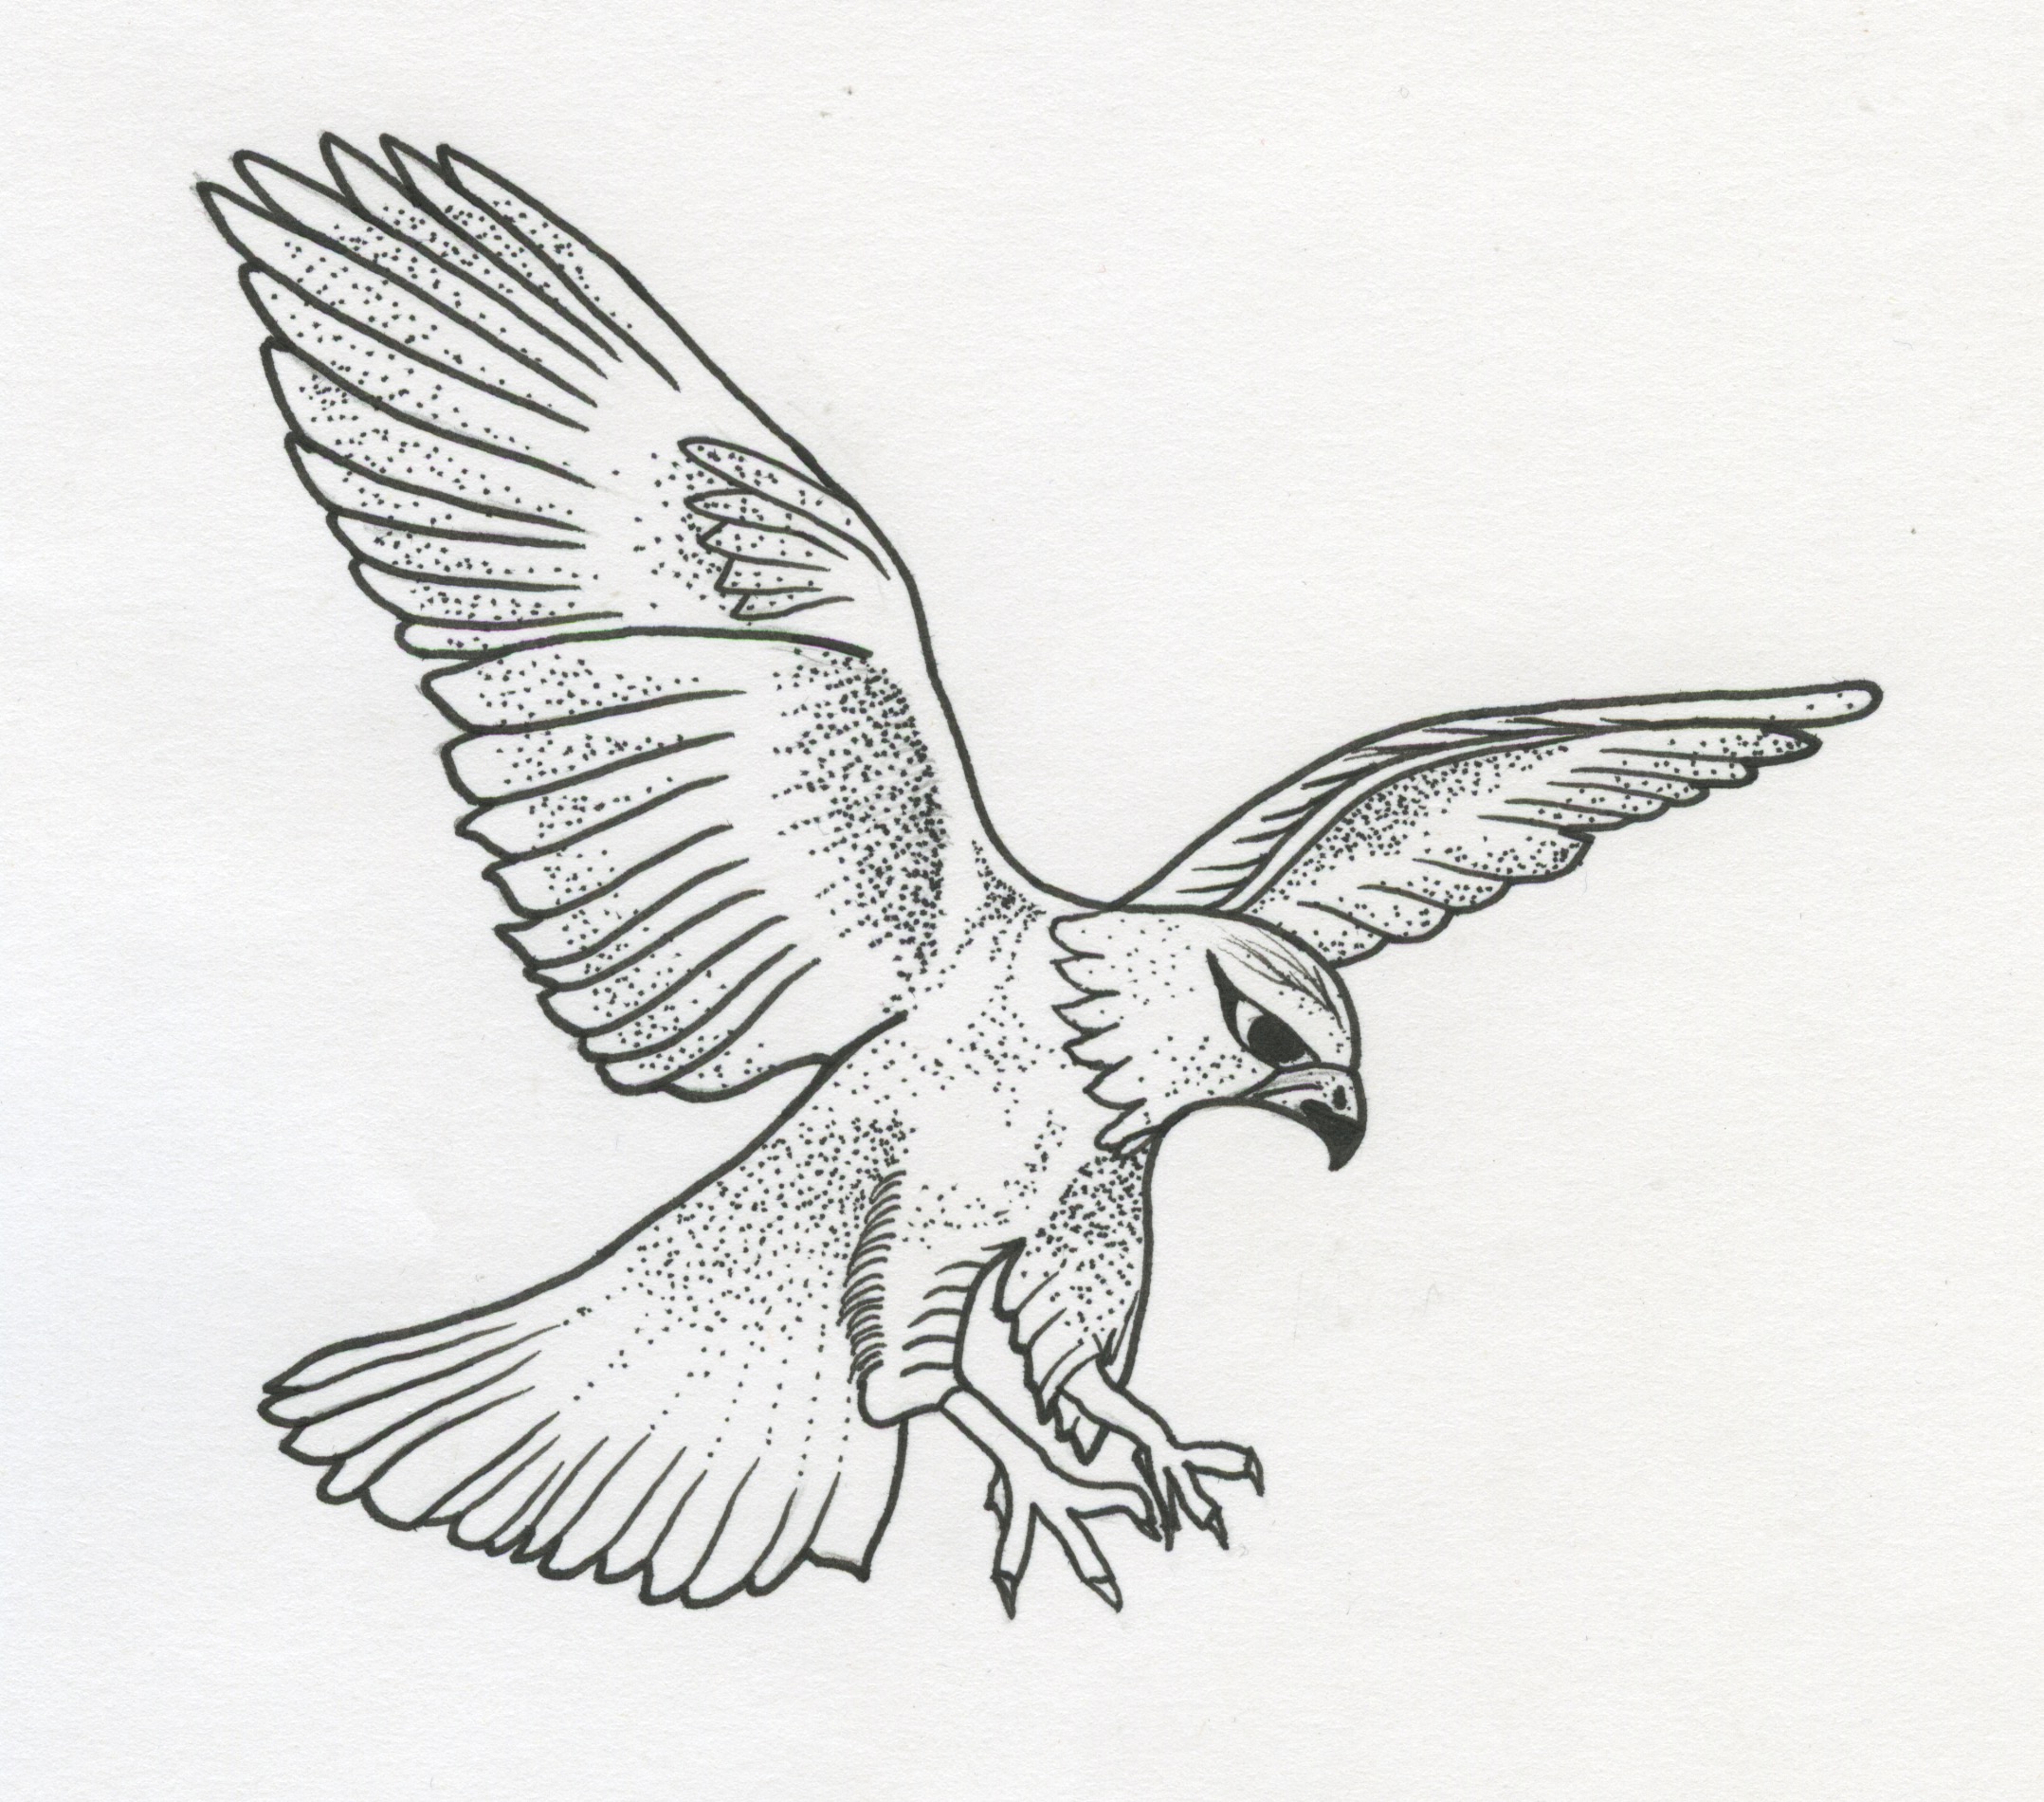 How To Draw Falcon With Images Bird Drawings Drawings Falcon Drawing